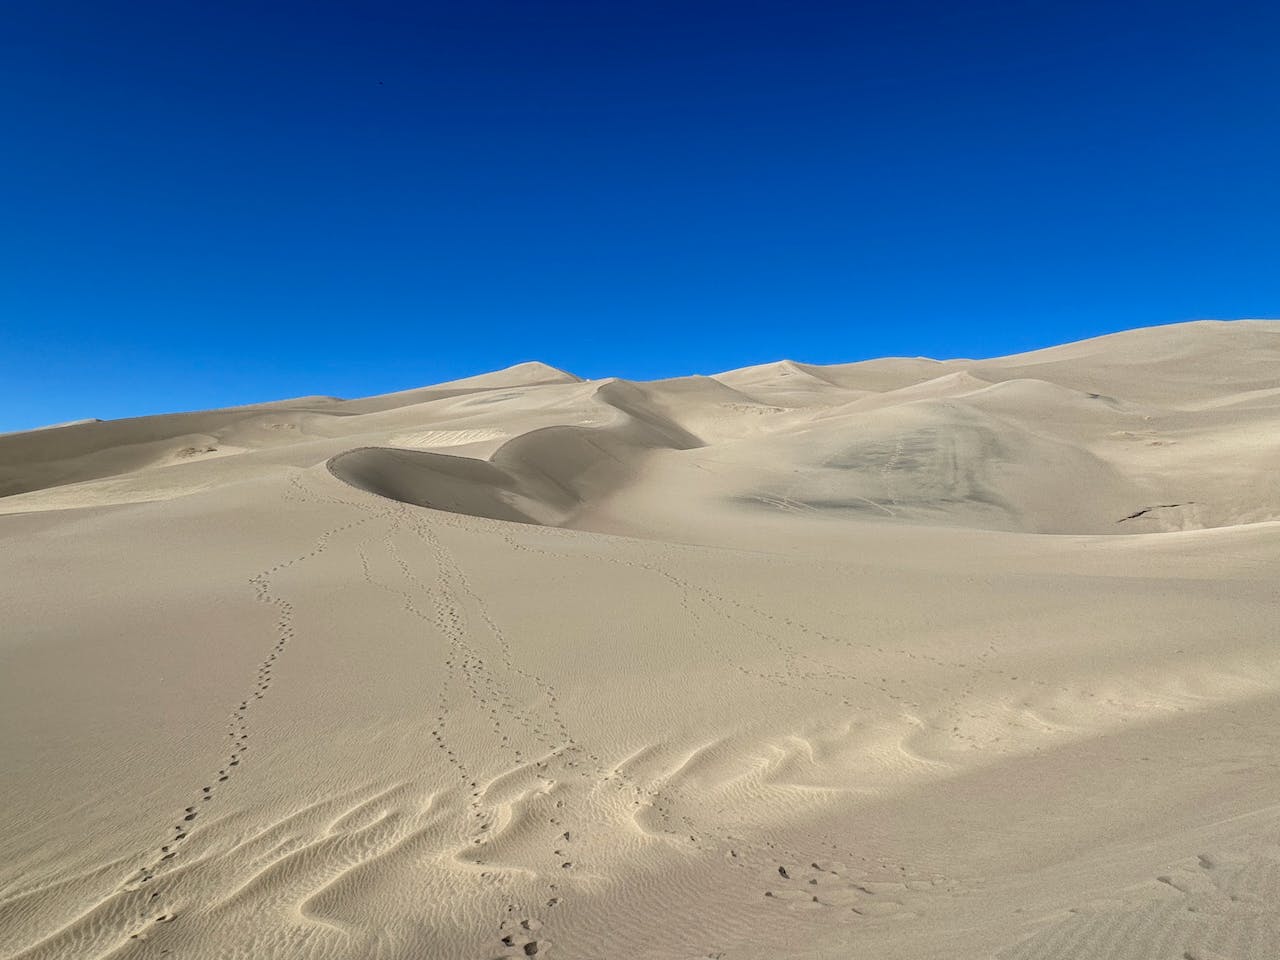 Giant golden sand dunes in front of a vibrant blue sky, at Great Sand Dunes National Park